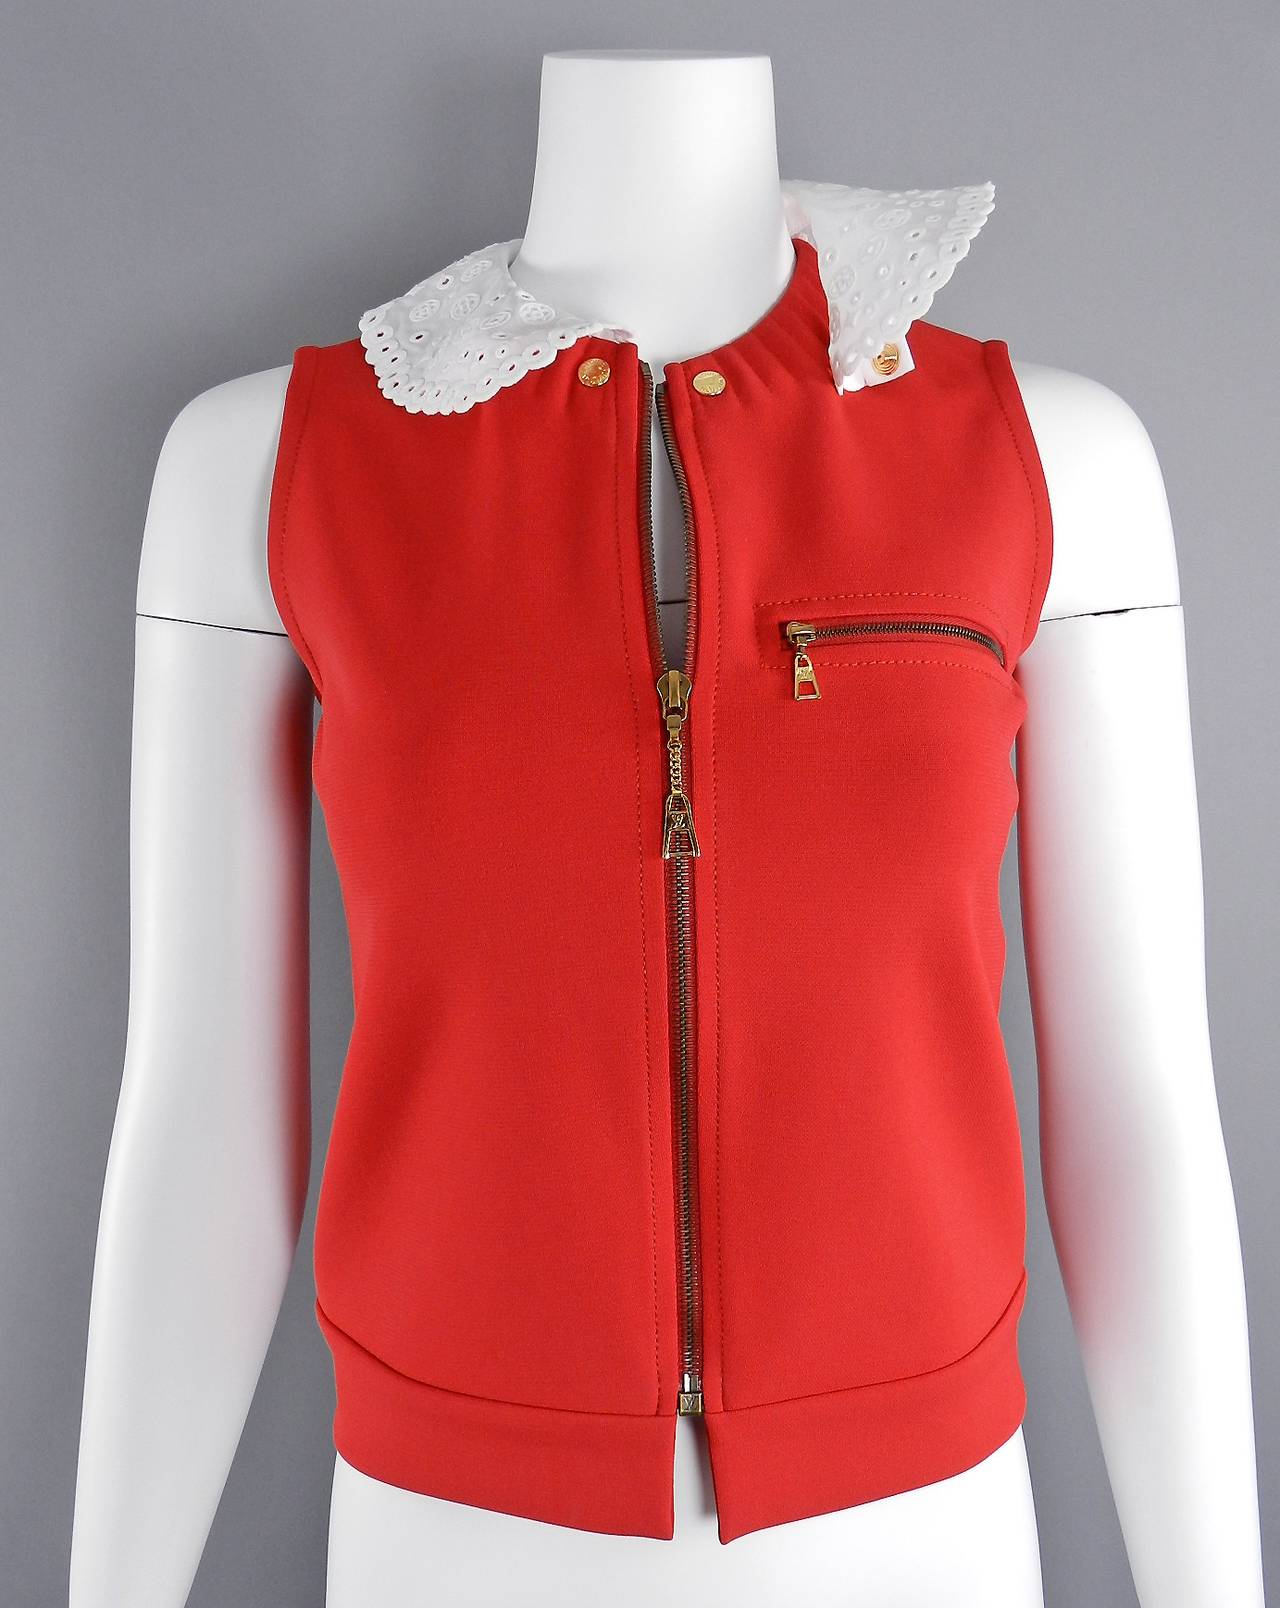 Women's Louis Vuitton Red Vest with White Lace Collar